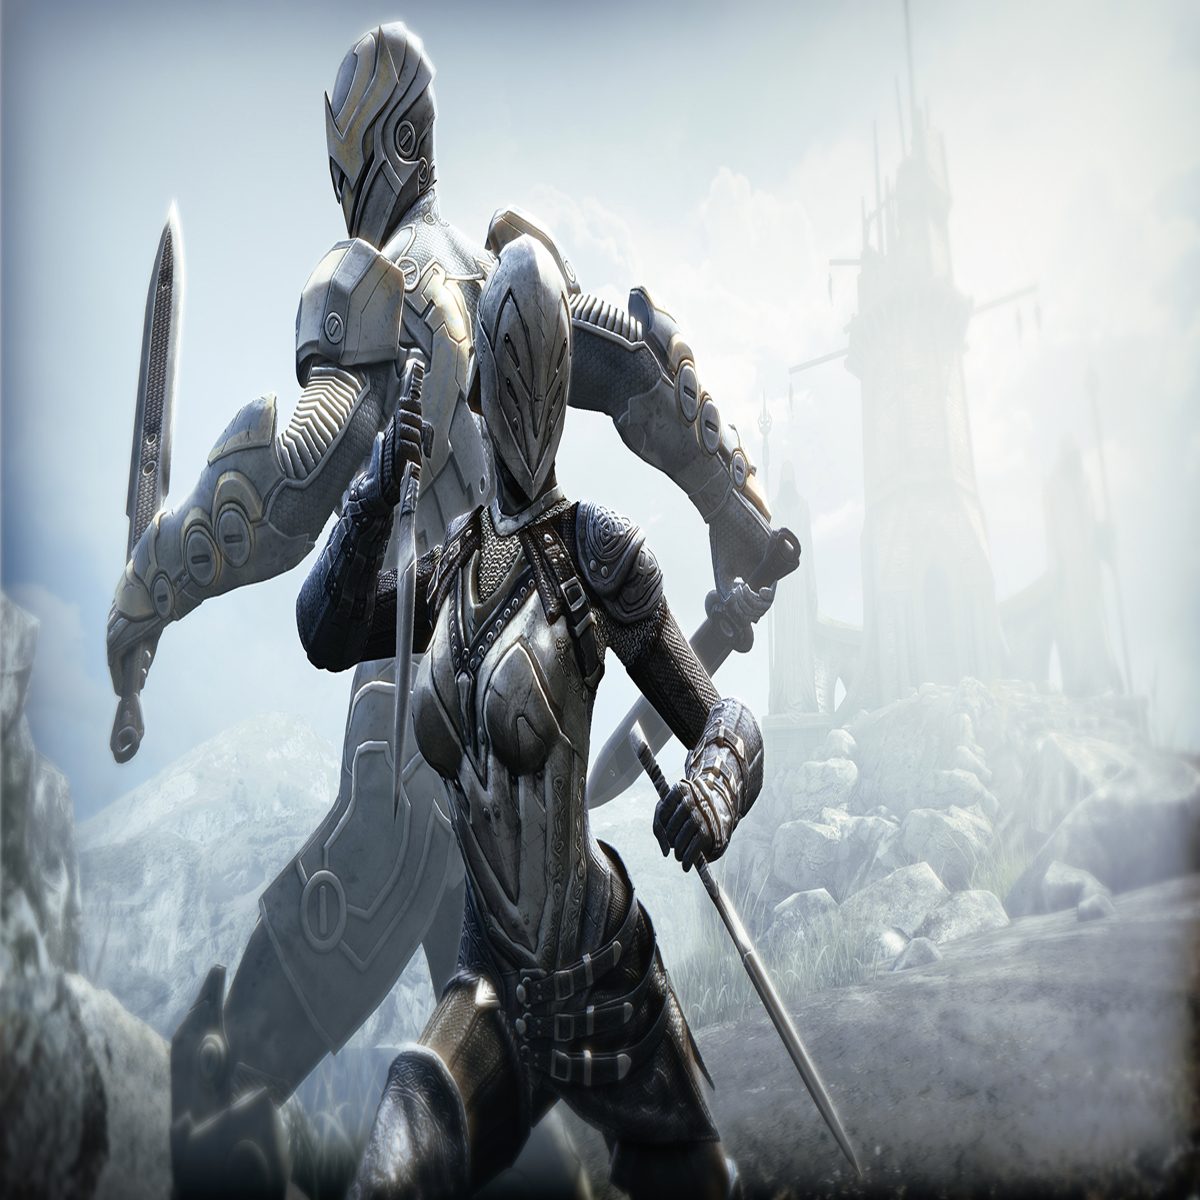 In A Surprise Move, Epic Has Removed All 3 Infinity Blade Games.